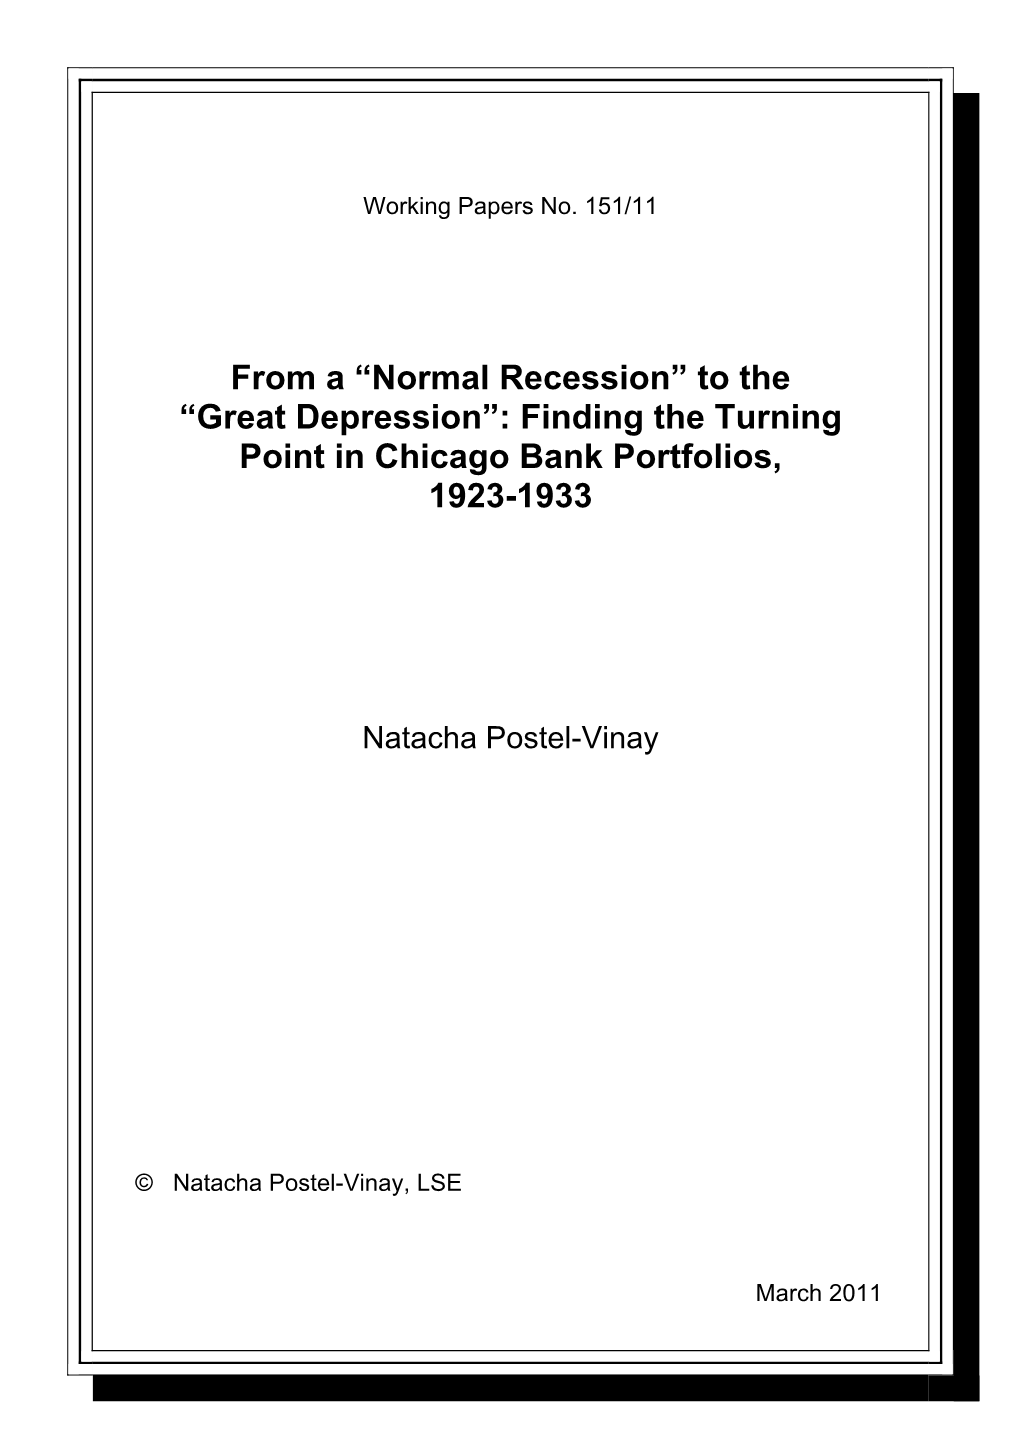 To the “Great Depression”: Finding the Turning Point in Chicago Bank Portfolios, 1923-1933